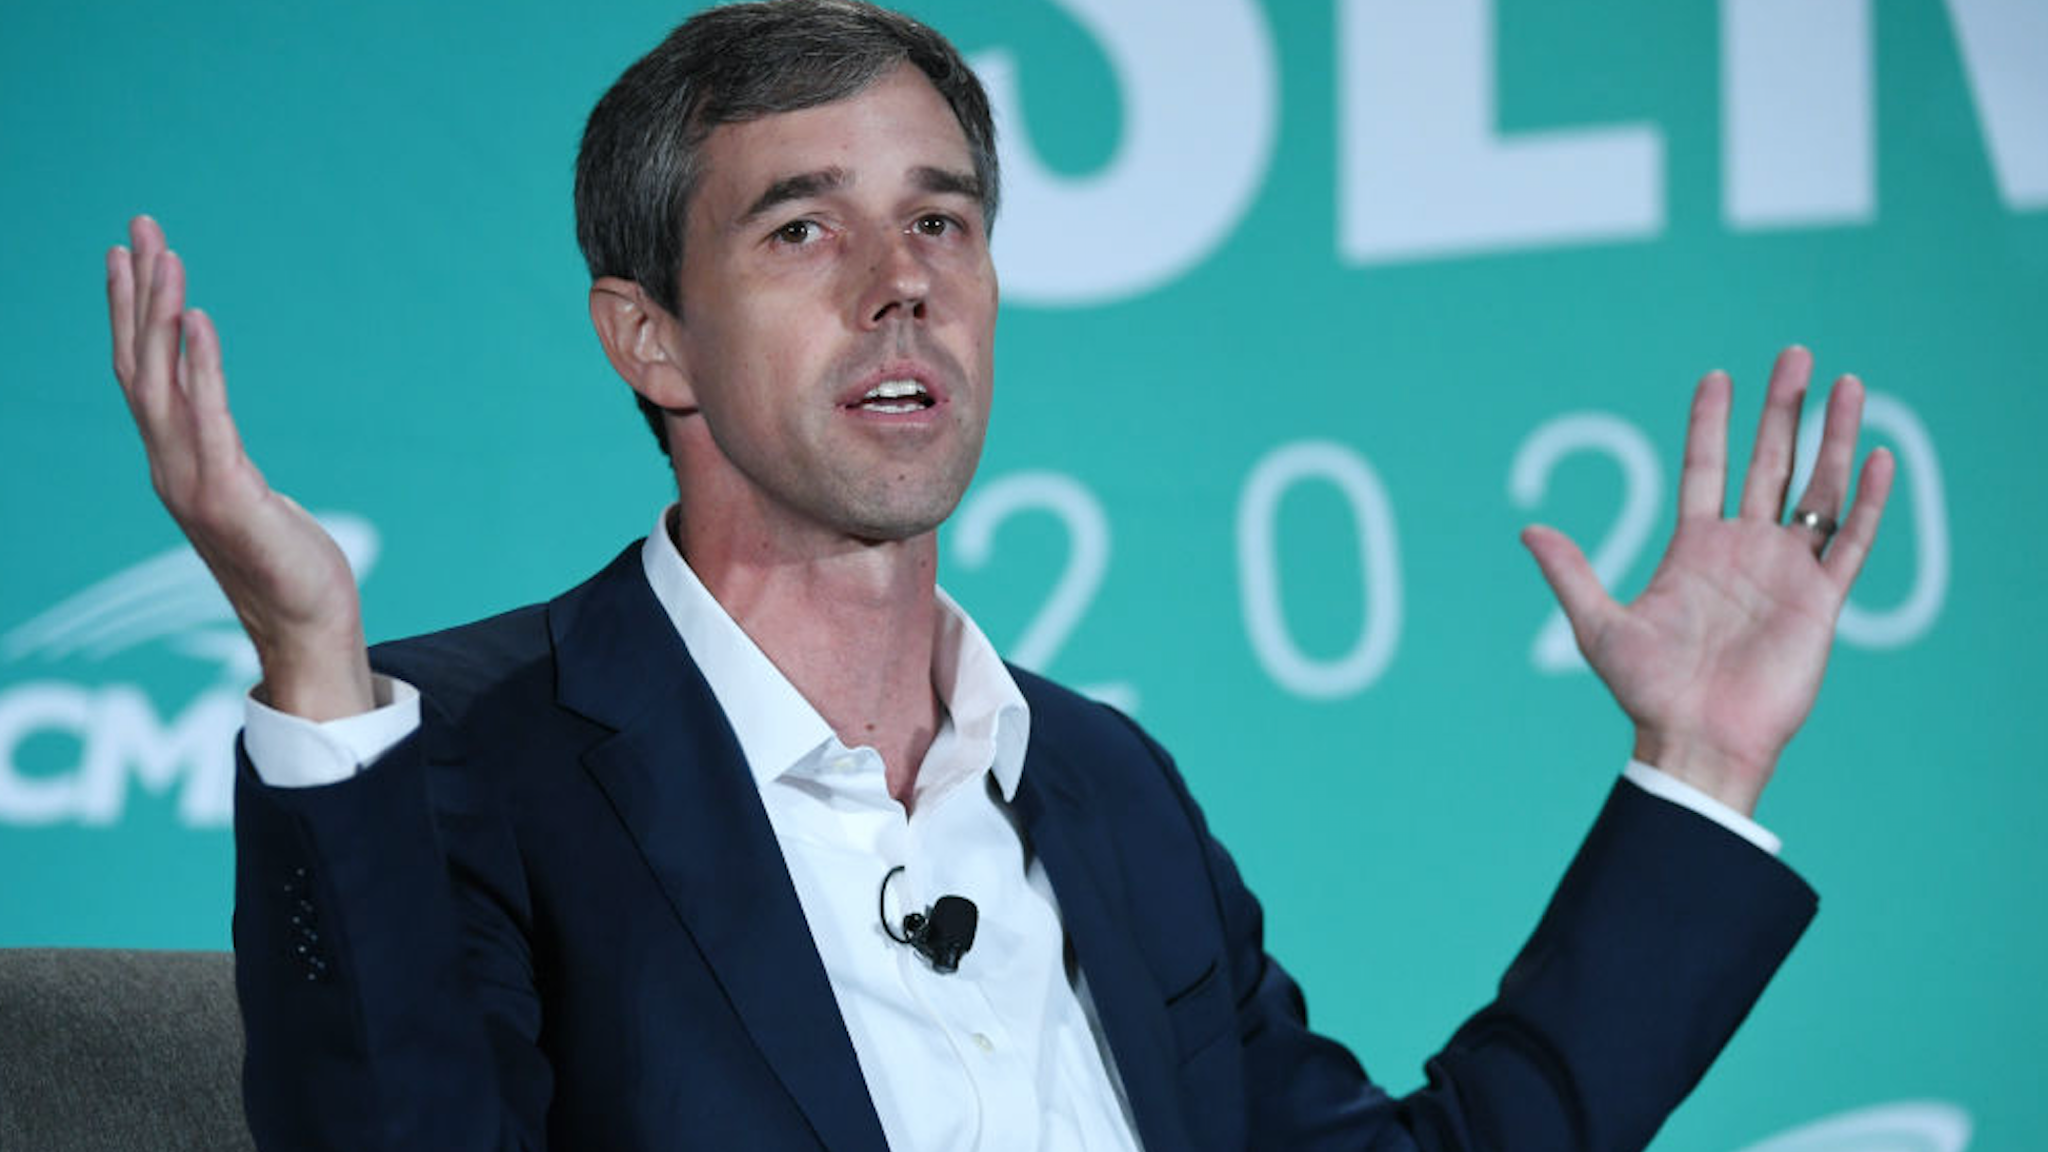 LAS VEGAS, NEVADA - AUGUST 03: Democratic presidential candidate Beto O‚ÄôRourke speaks during the 2020 Public Service Forum hosted by the American Federation of State, County and Municipal Employees (AFSCME) at UNLV on August 3, 2019 in Las Vegas, Nevada.